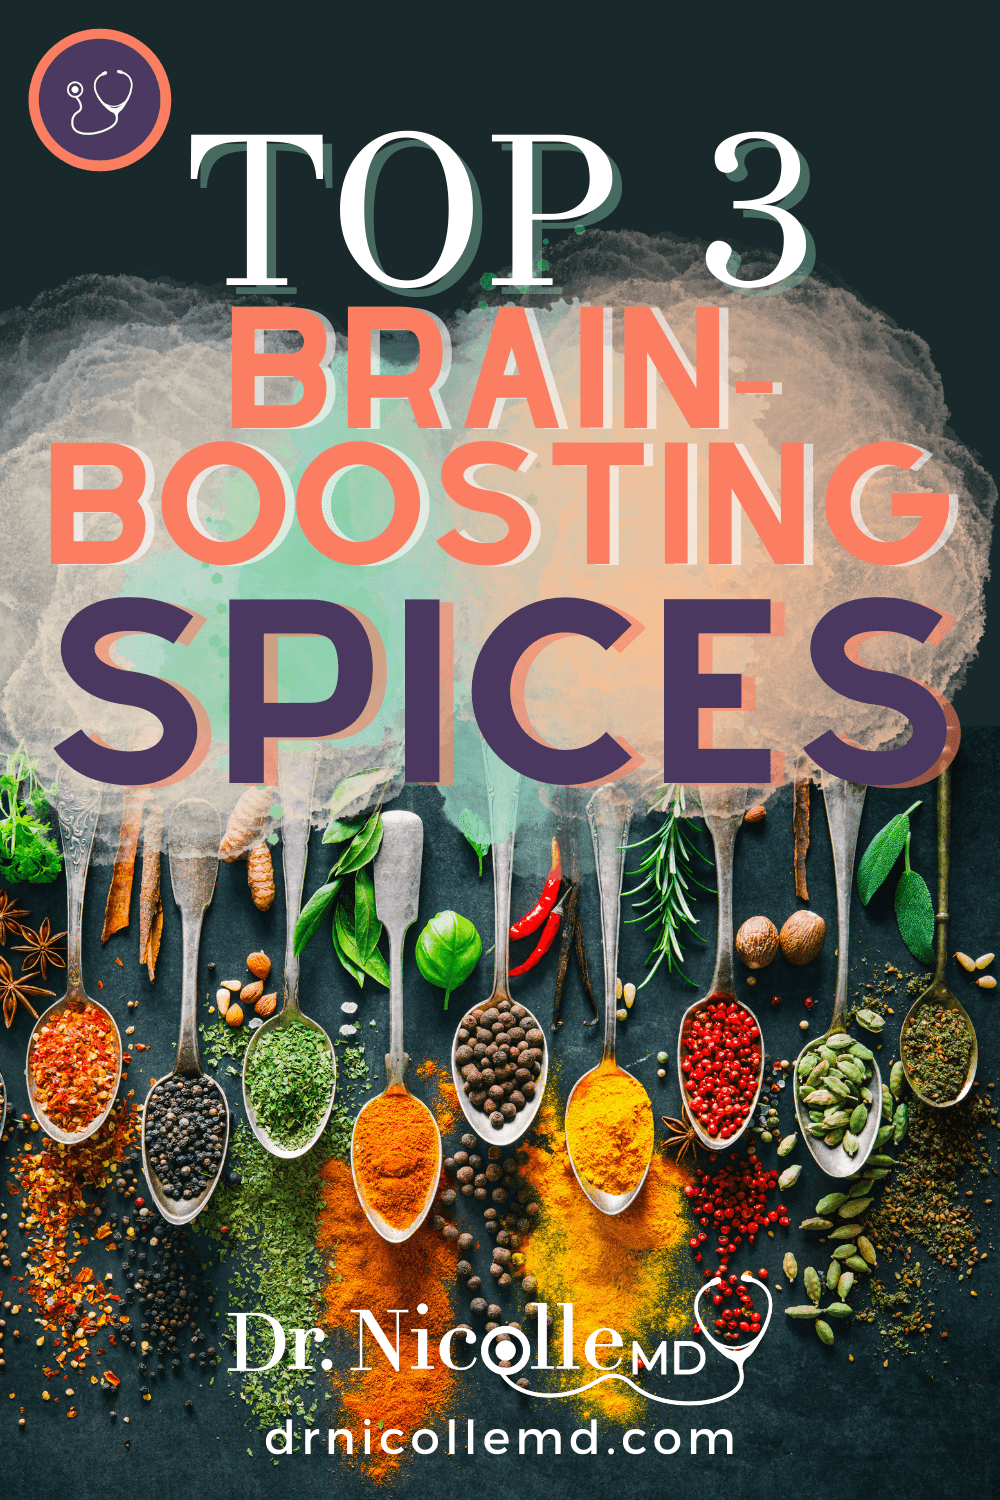 Top 3 Brain-Boosting Spices